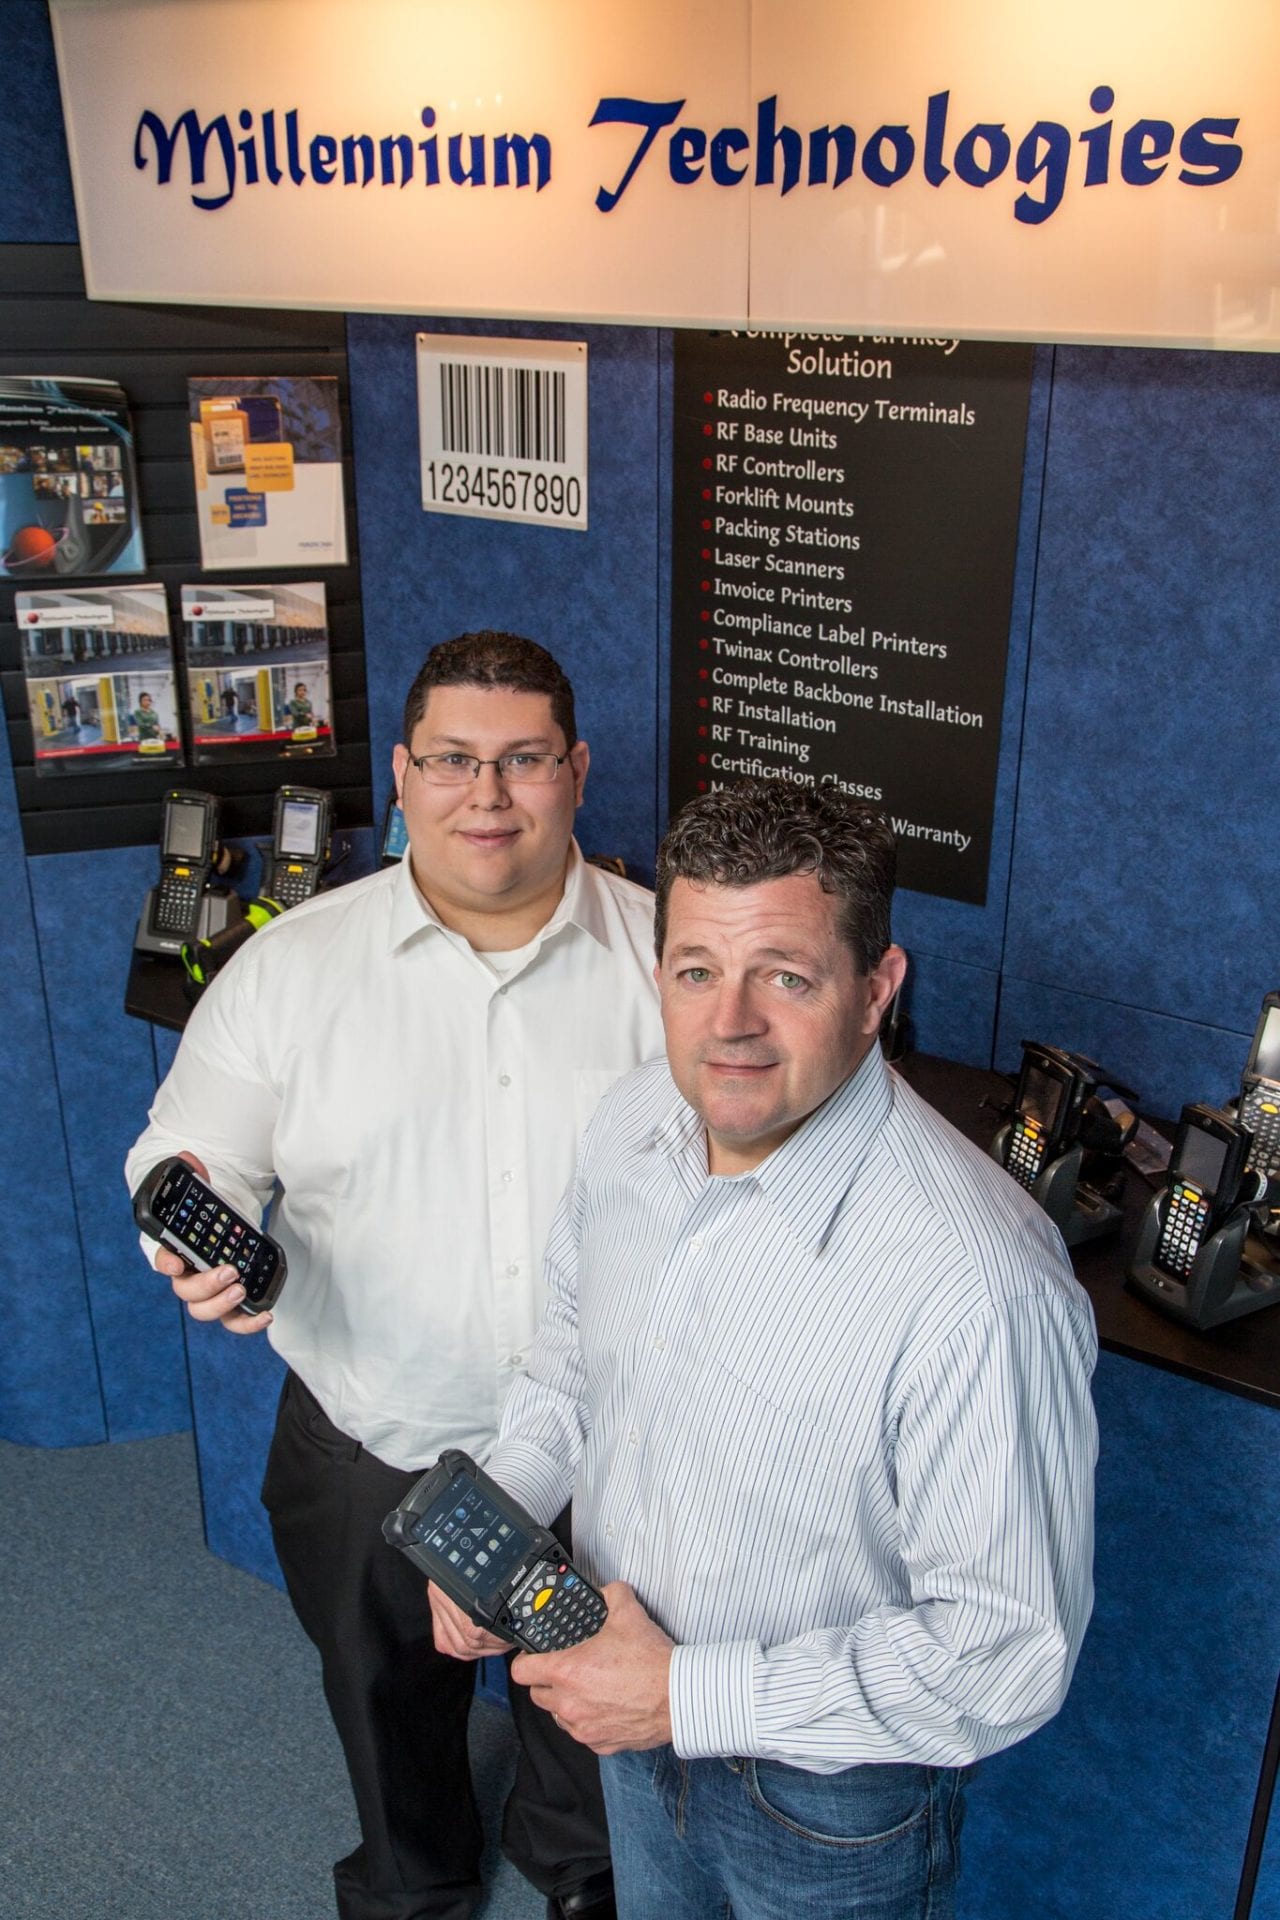 Millennium Technologies Employees holding Mobile Computers and Scanners for Services